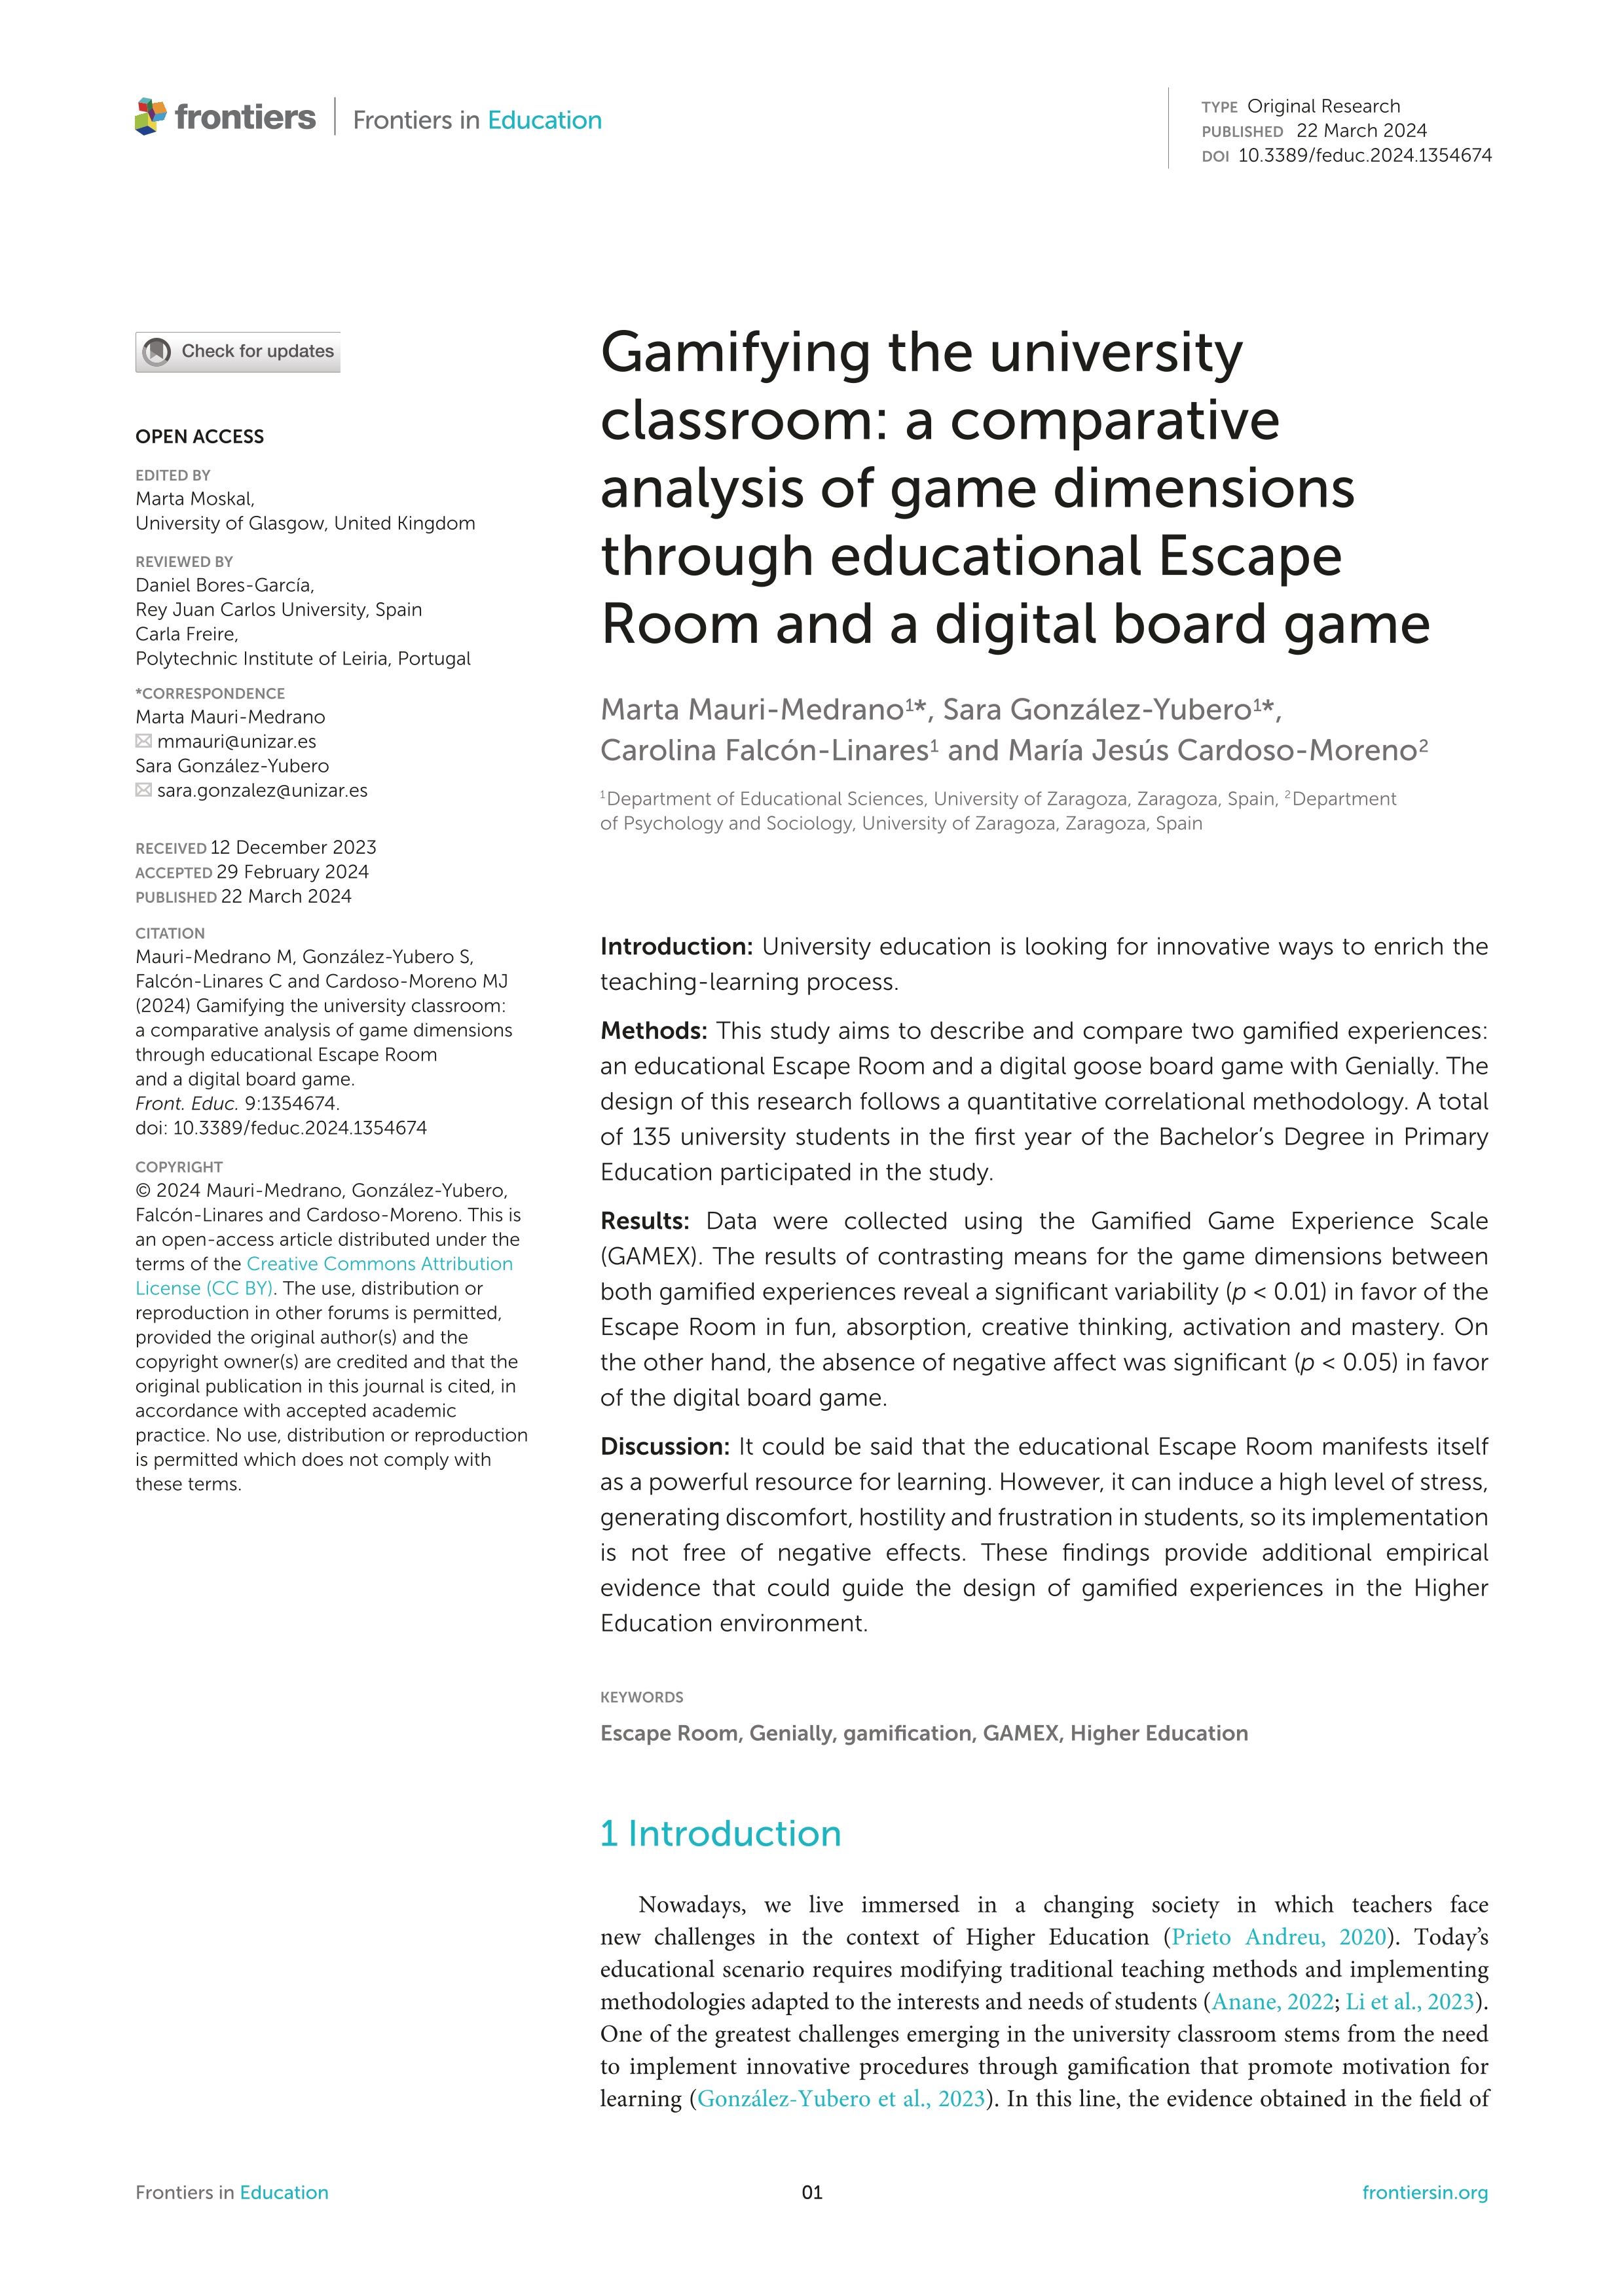 Gamifying the university classroom: a comparative analysis of game dimensions through educational Escape Room and a digital board game